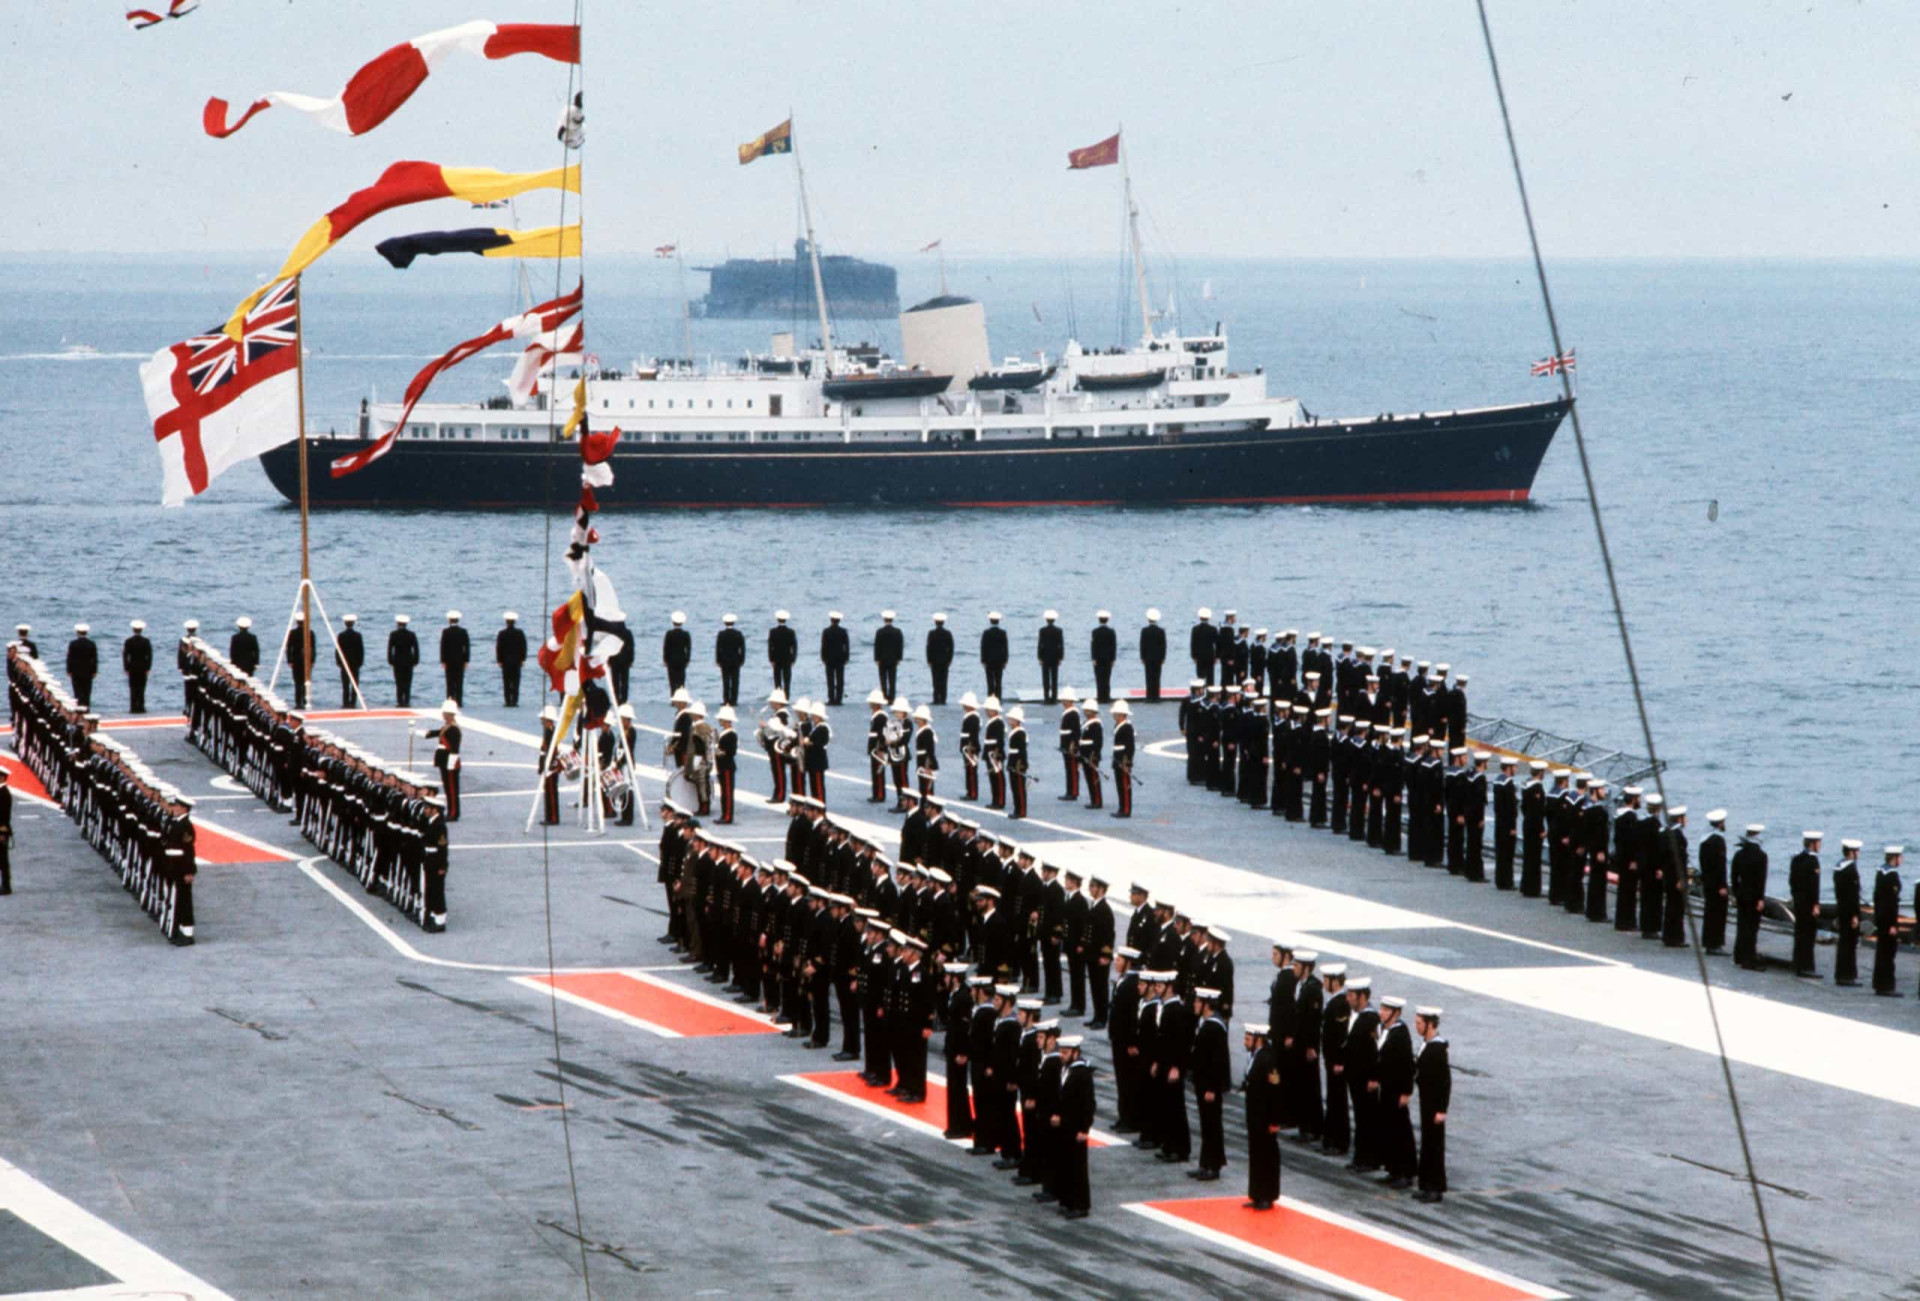 <p>The Silver Jubilee of Queen Elizabeth II in 1977 marked the 25th anniversary of the monarch's accession to the British throne. Among the series of year-long events was the Silver Jubilee Review of the Fleet at Spithead, off Portsmouth in southern England. <em>Britannia</em> sailed past dozens of Royal Navy vessels anchored in the Solent on June 28, 1977.</p><p>You may also like:<a href="https://www.starsinsider.com/n/349594?utm_source=msn.com&utm_medium=display&utm_campaign=referral_description&utm_content=474709v3en-sg"> Celebrity siblings that fame forgot</a></p>